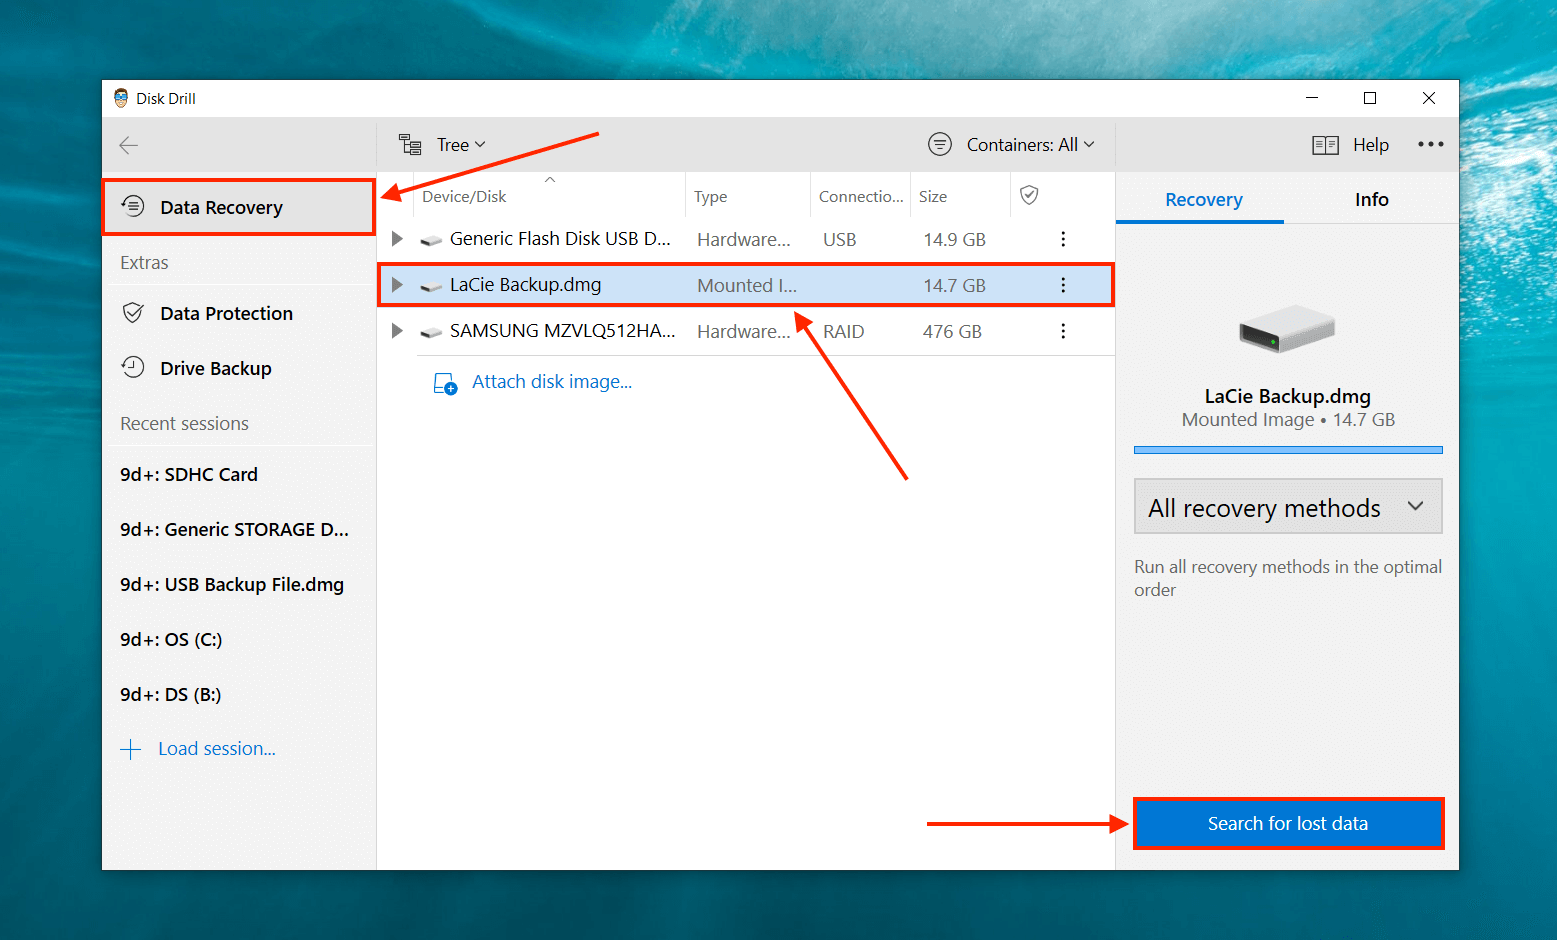 Image backup select in Disk Drill